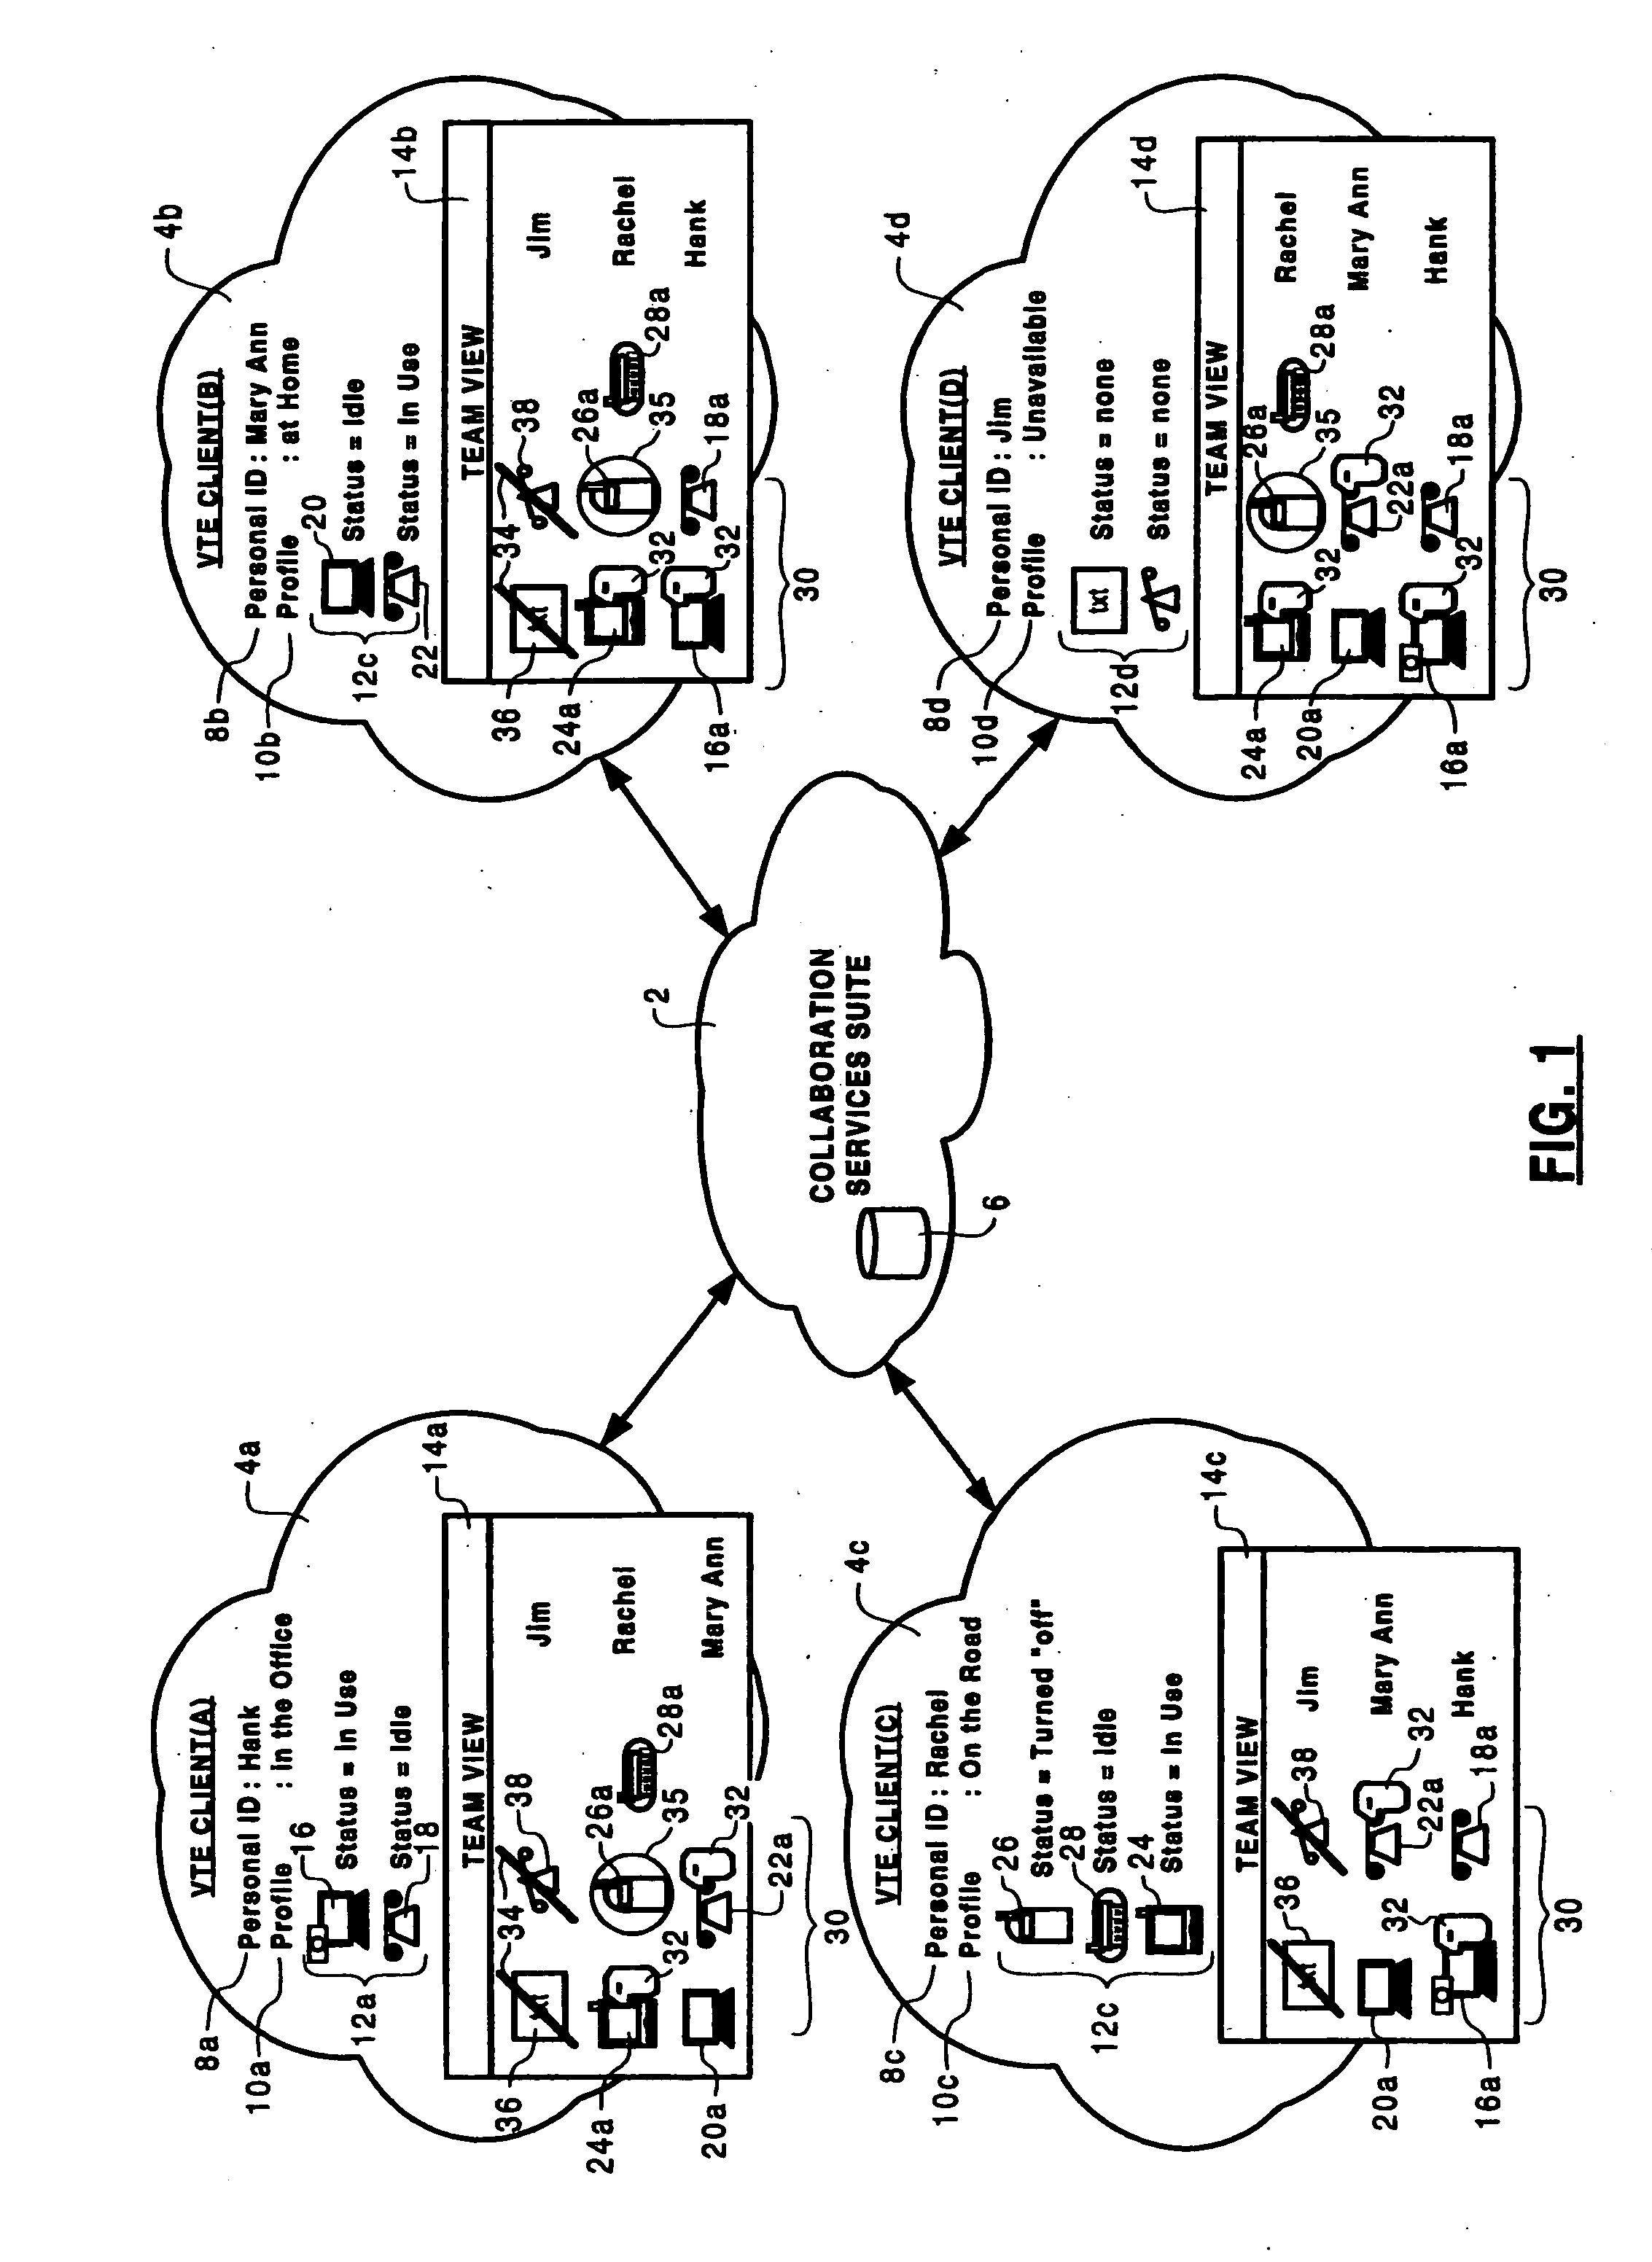 Method and system for creating a virtual team environment